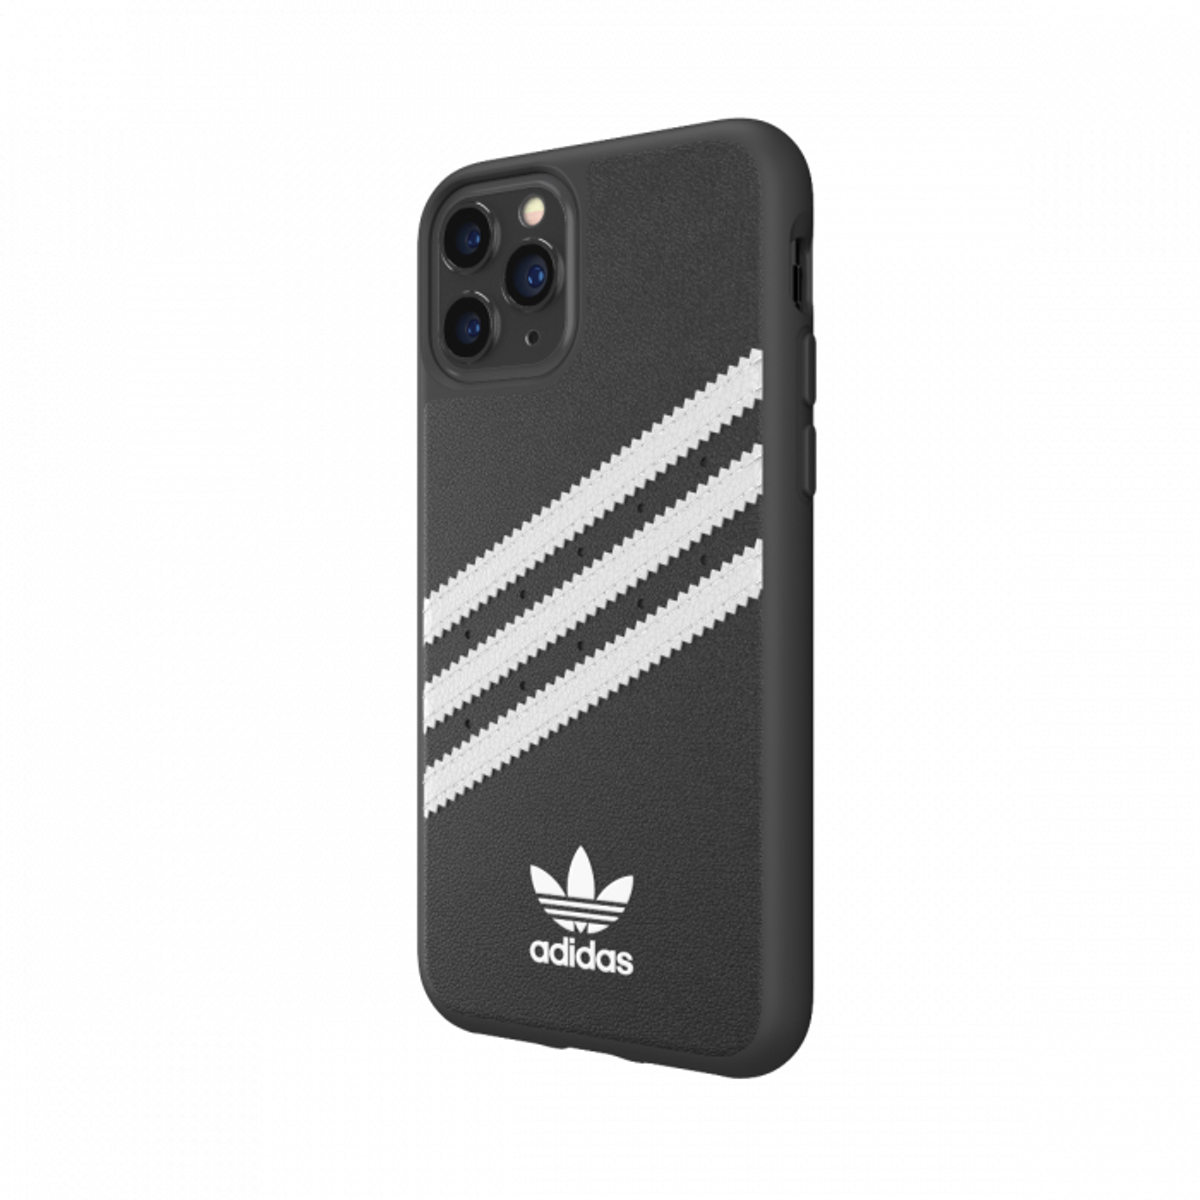 Pro, 11 36279 PRO Schwarz/Weiß OR MOULDED BL/WH, 11 IP iPhone Apple, ADIDAS CASE Bookcover,